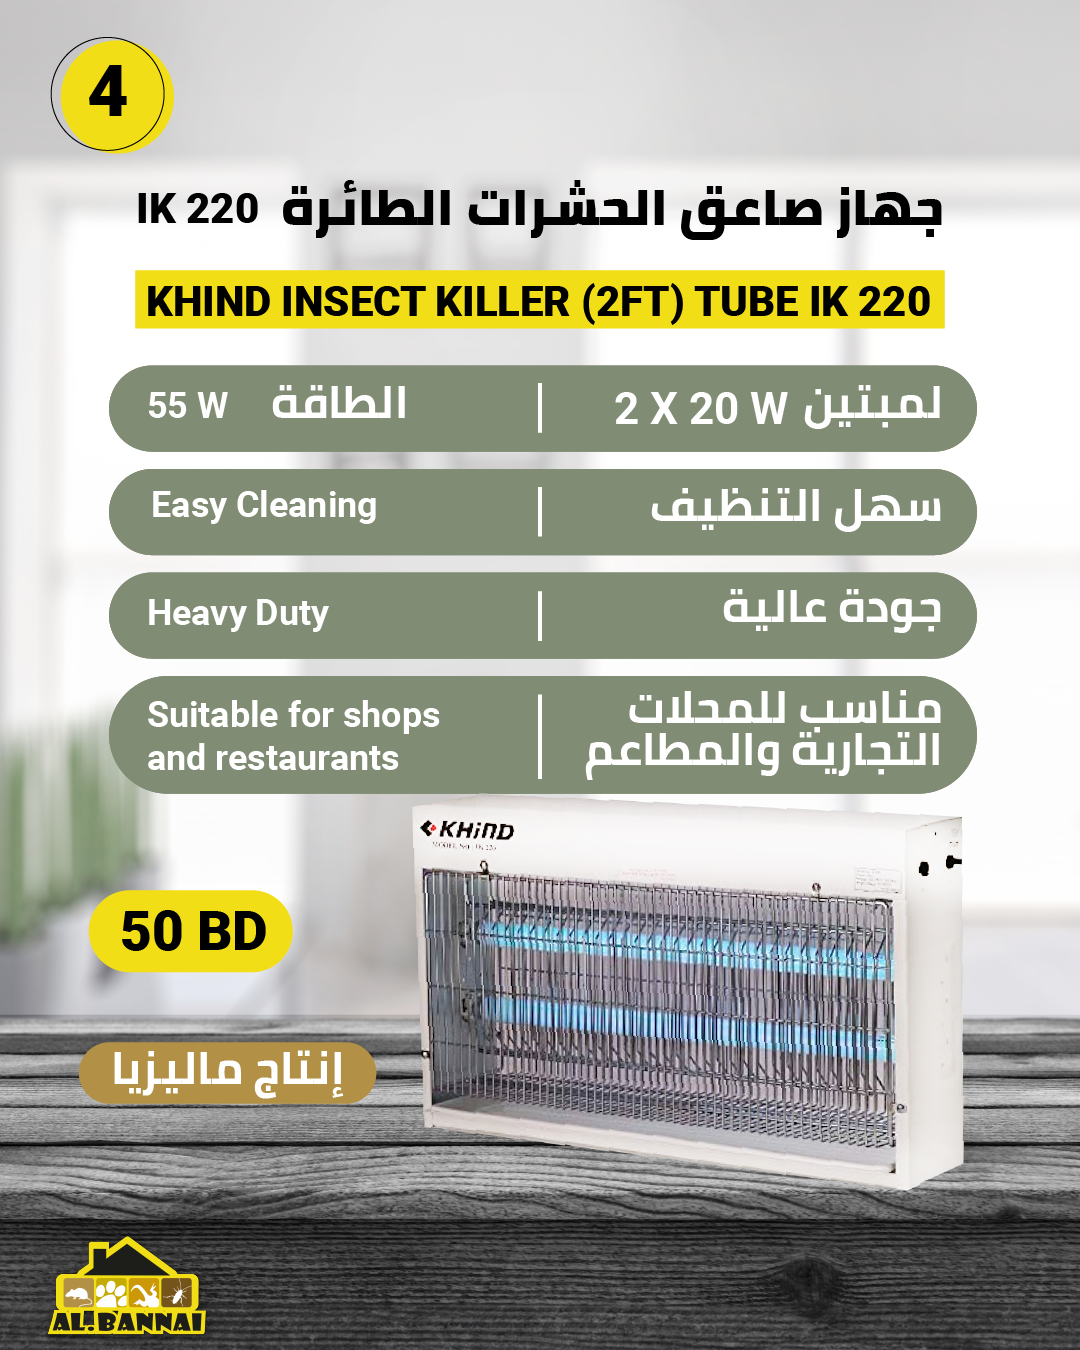 KHIND INSECT KILLER